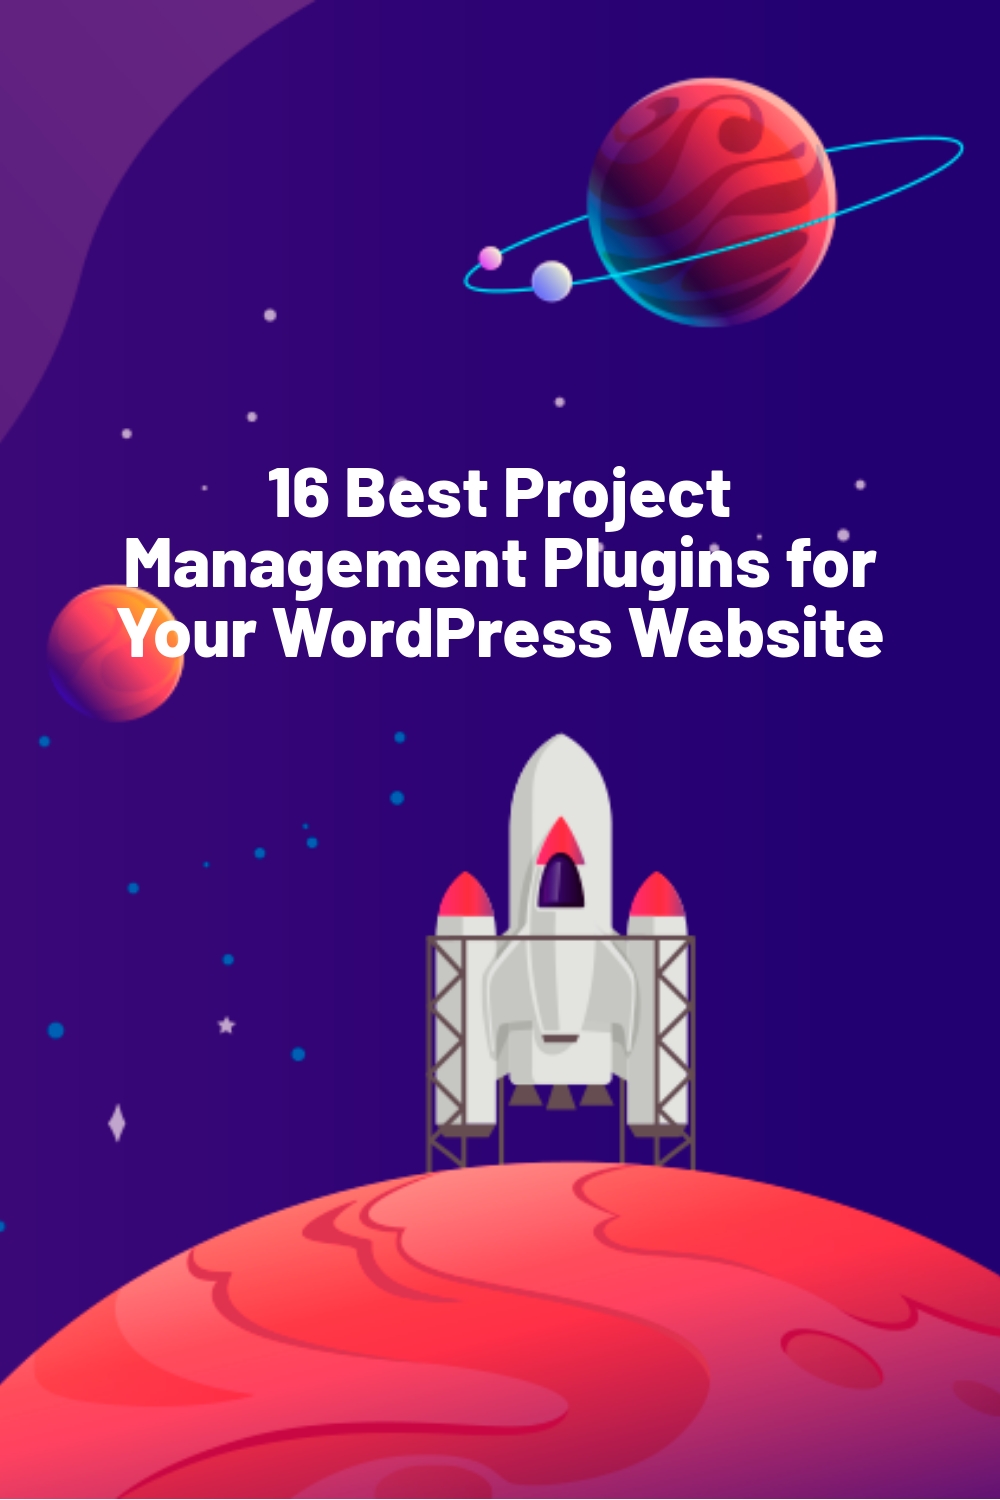 16 Best Project Management Plugins for Your WordPress Website